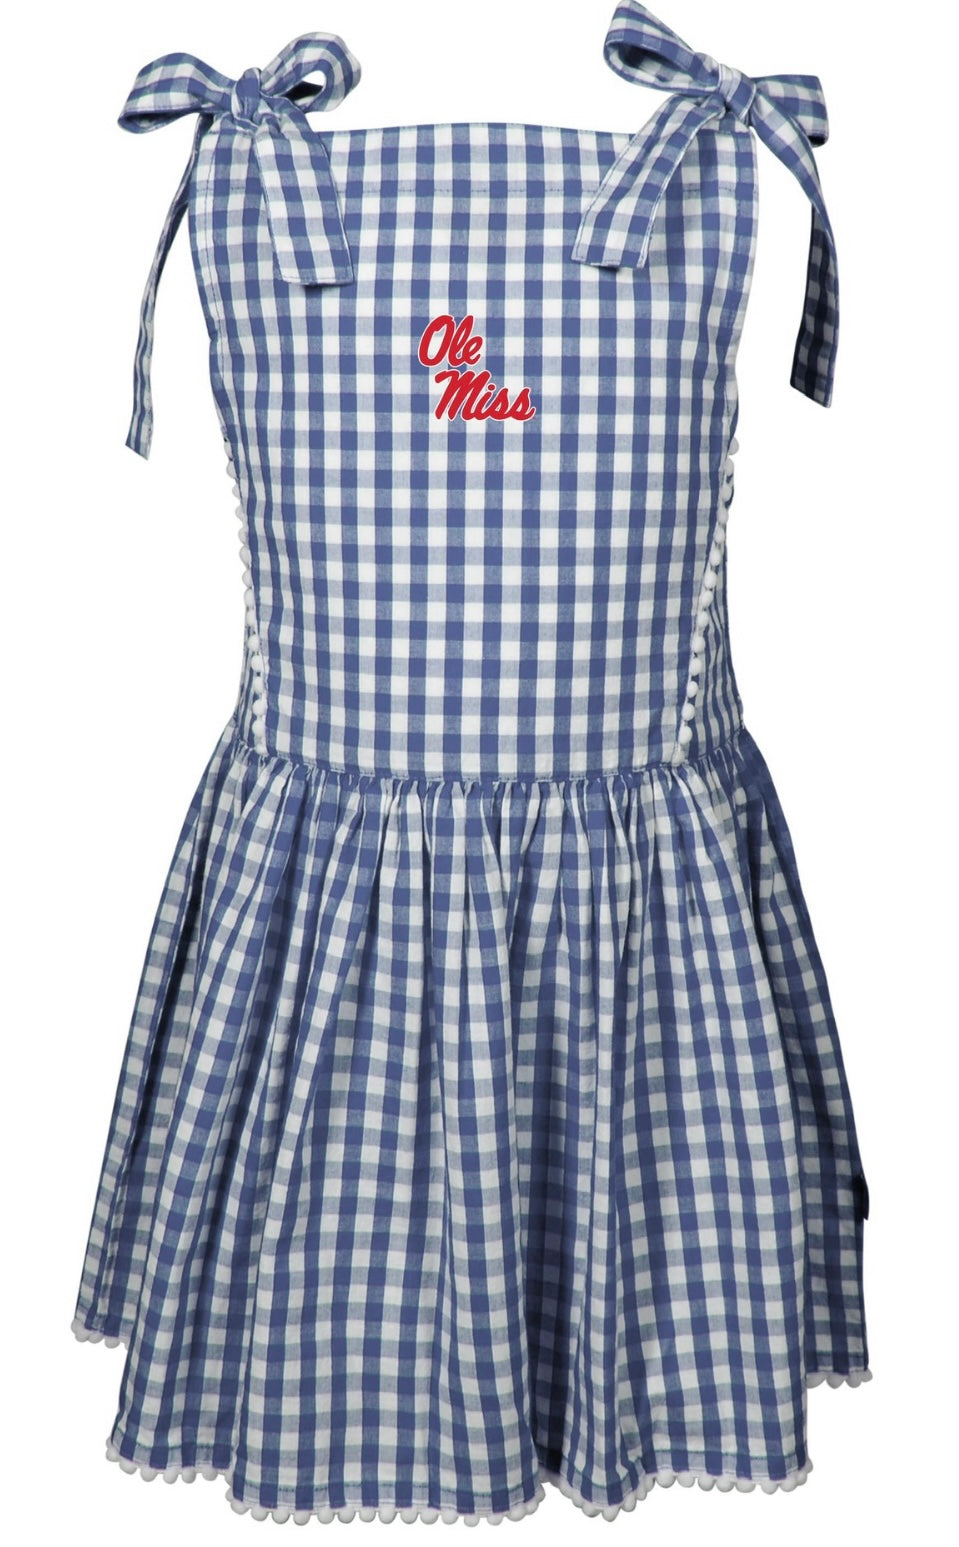 Teagan Navy and White Plaid Dress - Toddler and Youth